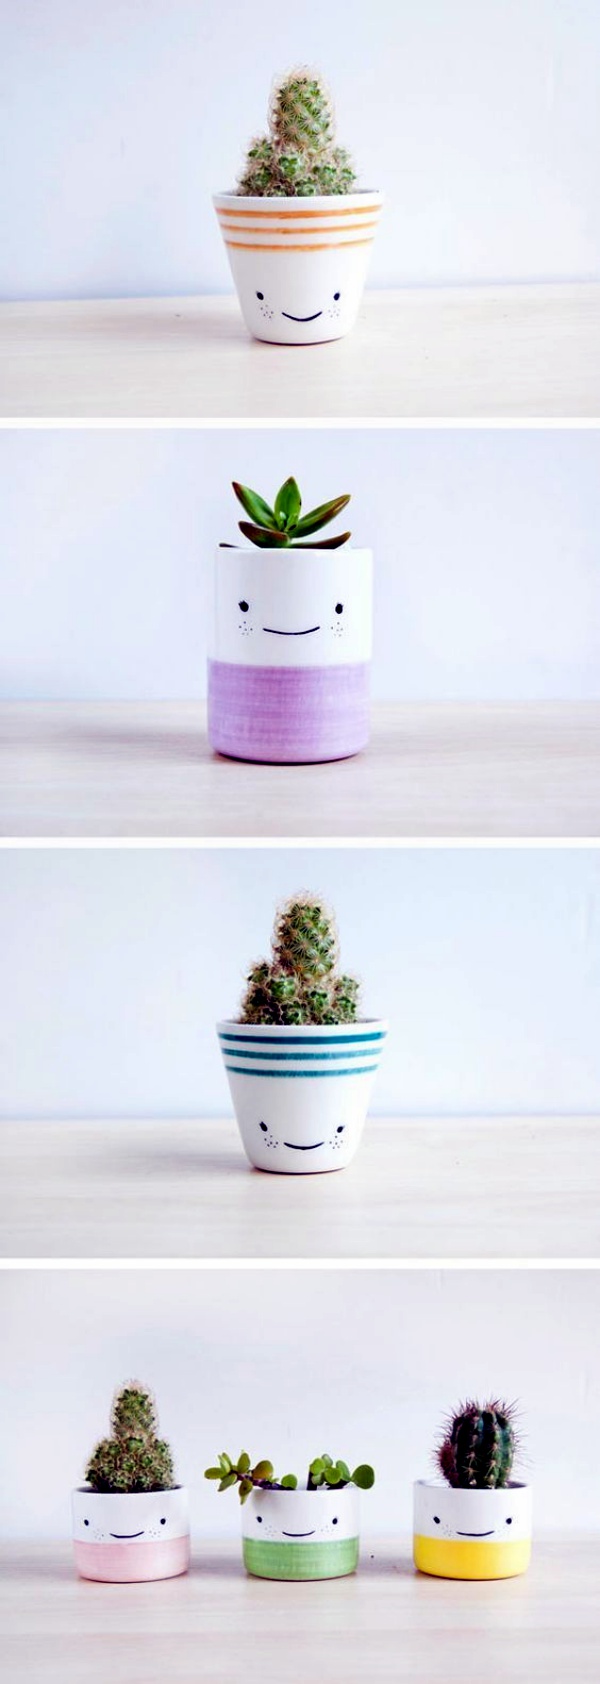 Pottery Painting Ideas to Try This Year00001